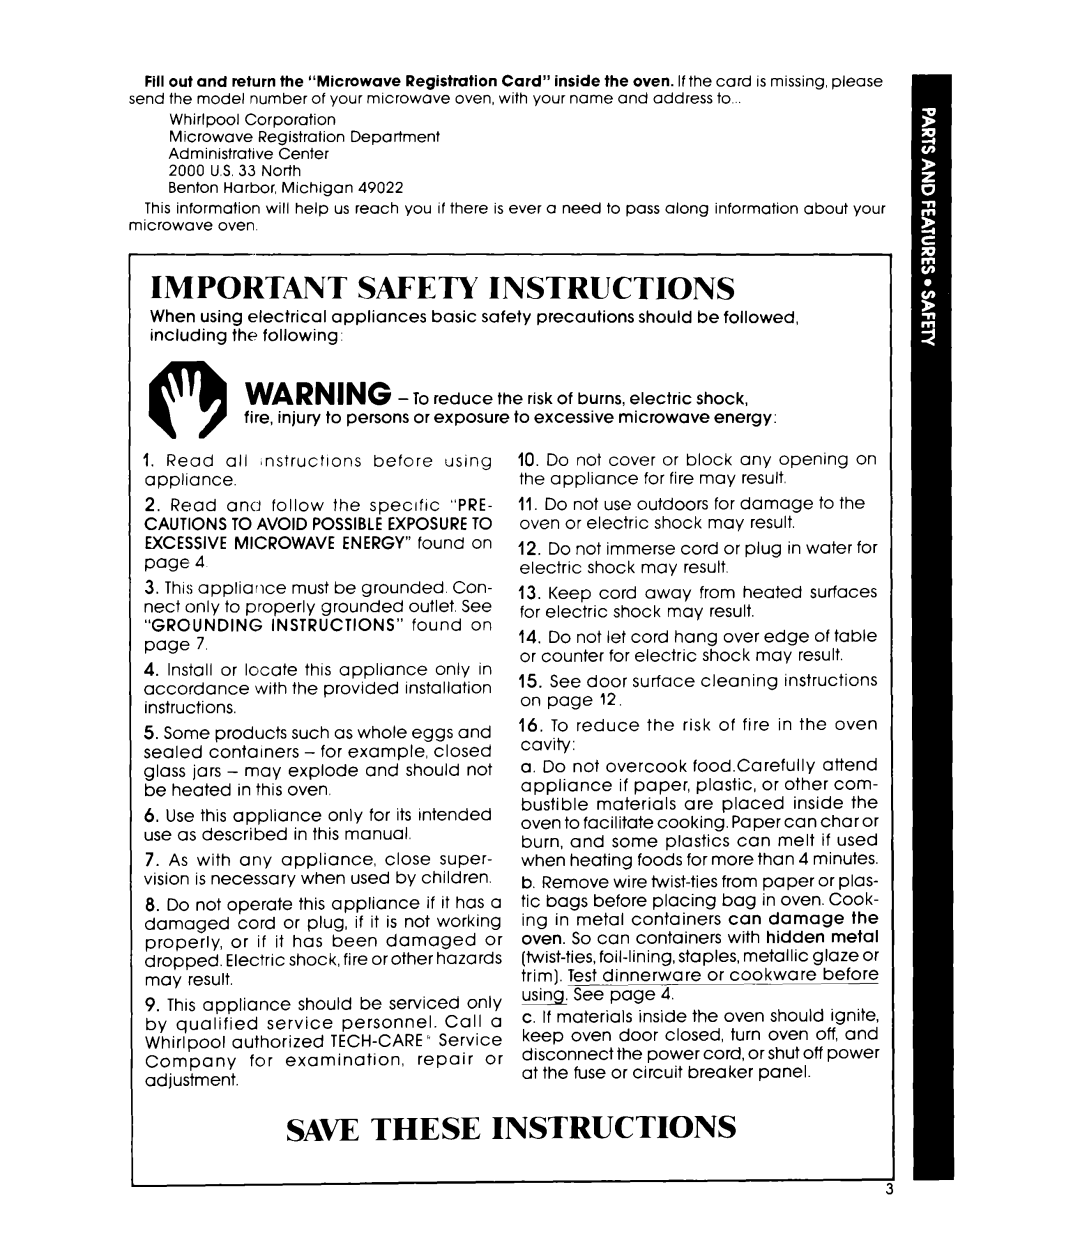 Whirlpool MW3000XM manual Important Safety Instructions, Saw These Instructions 